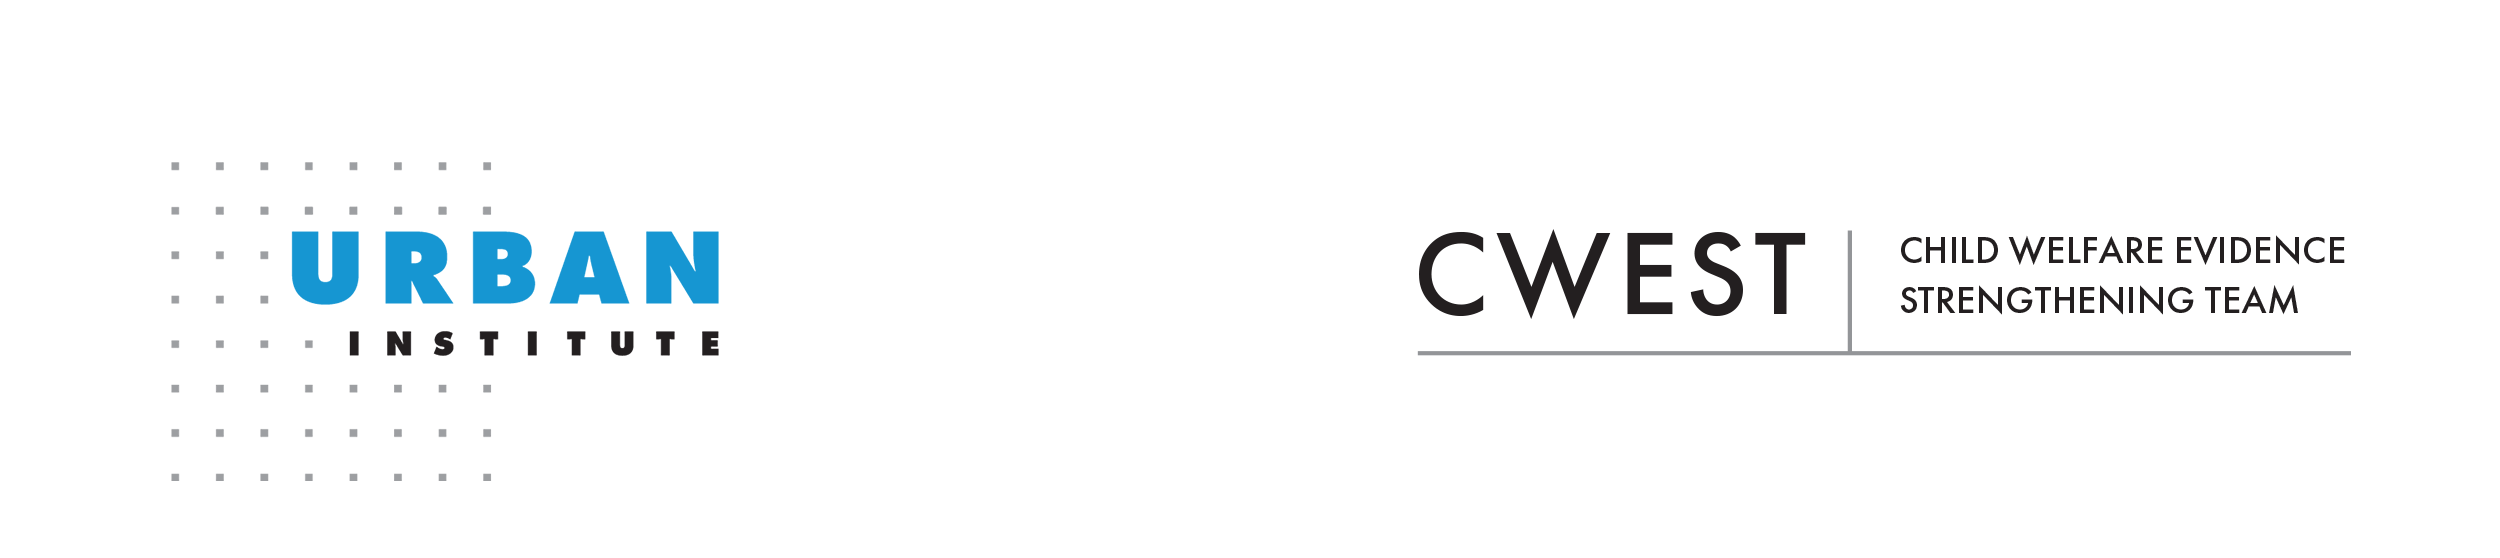 Cwest and urban logo webpage banner